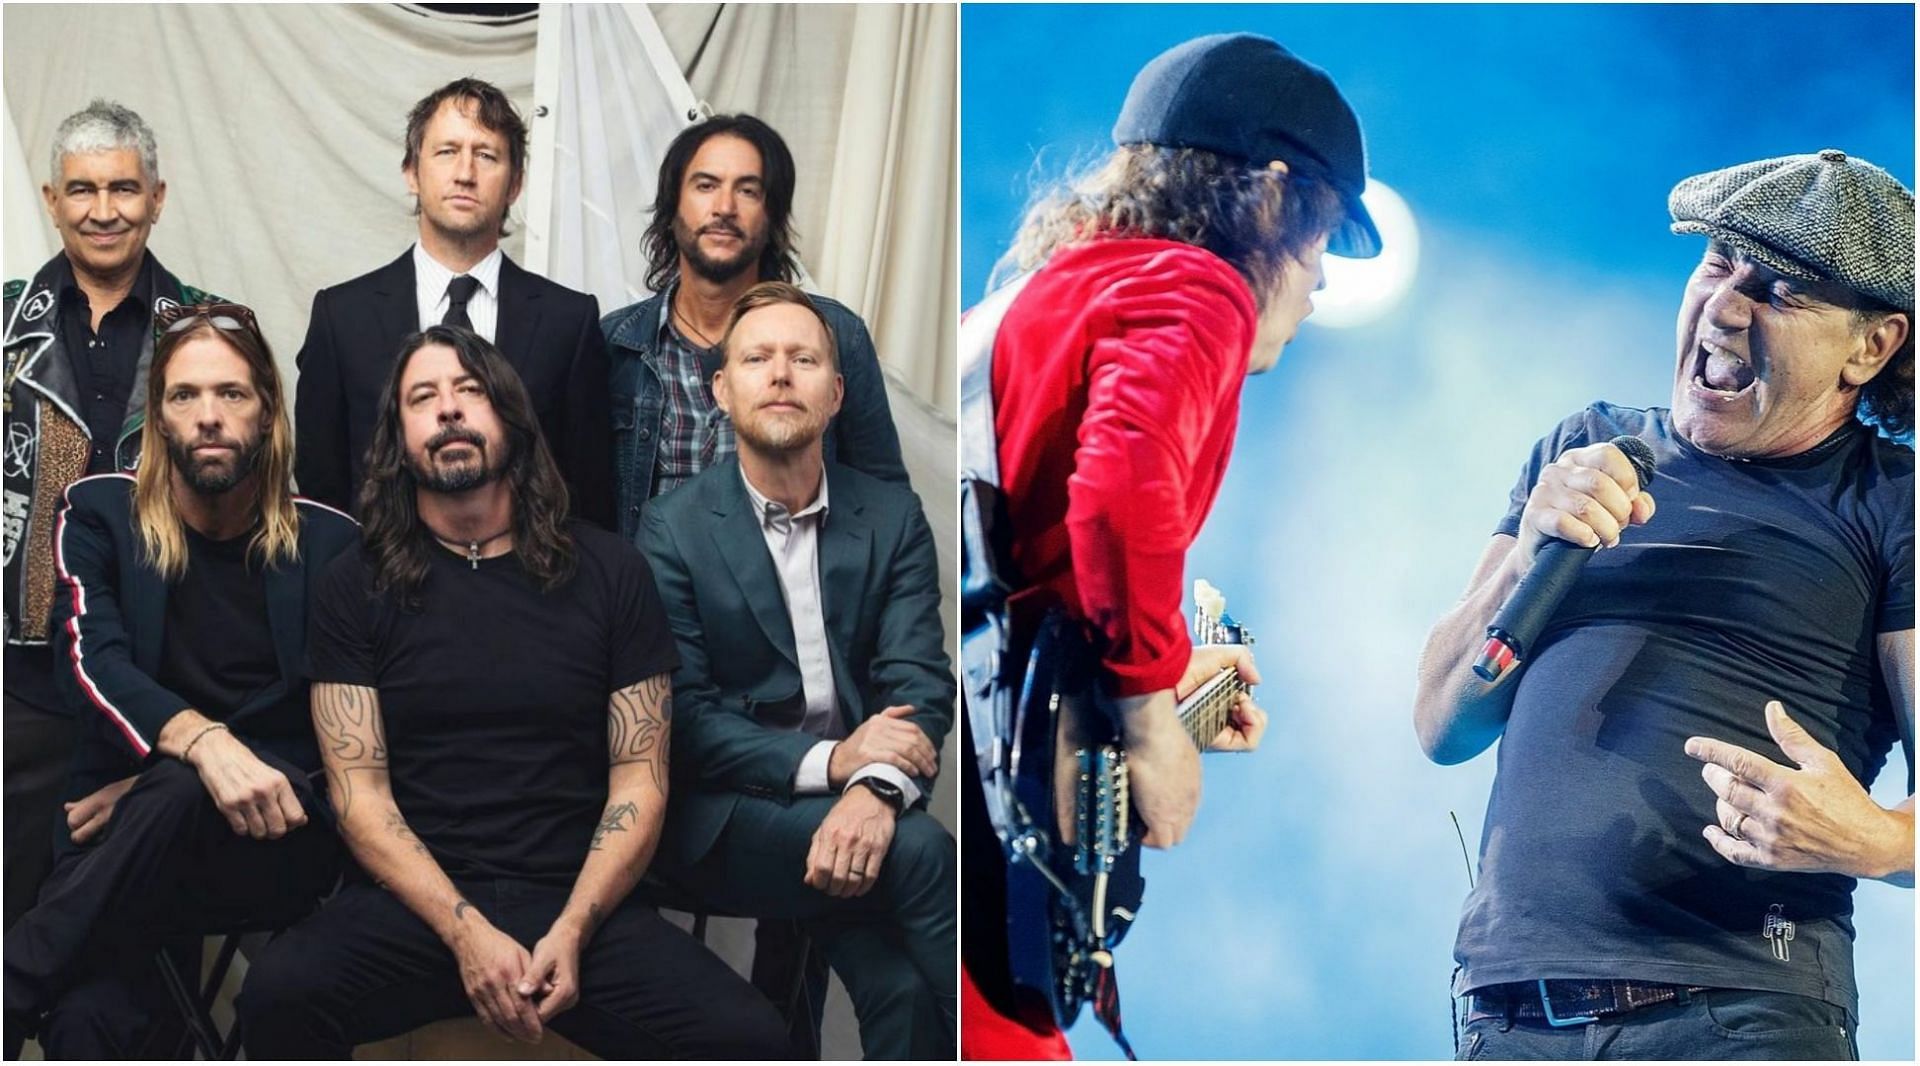 With the 2022 GRAMMYs around the corner, the Rock Performance category is a hotly contested one. (Images via Instagram: @foofighters, @acdc)